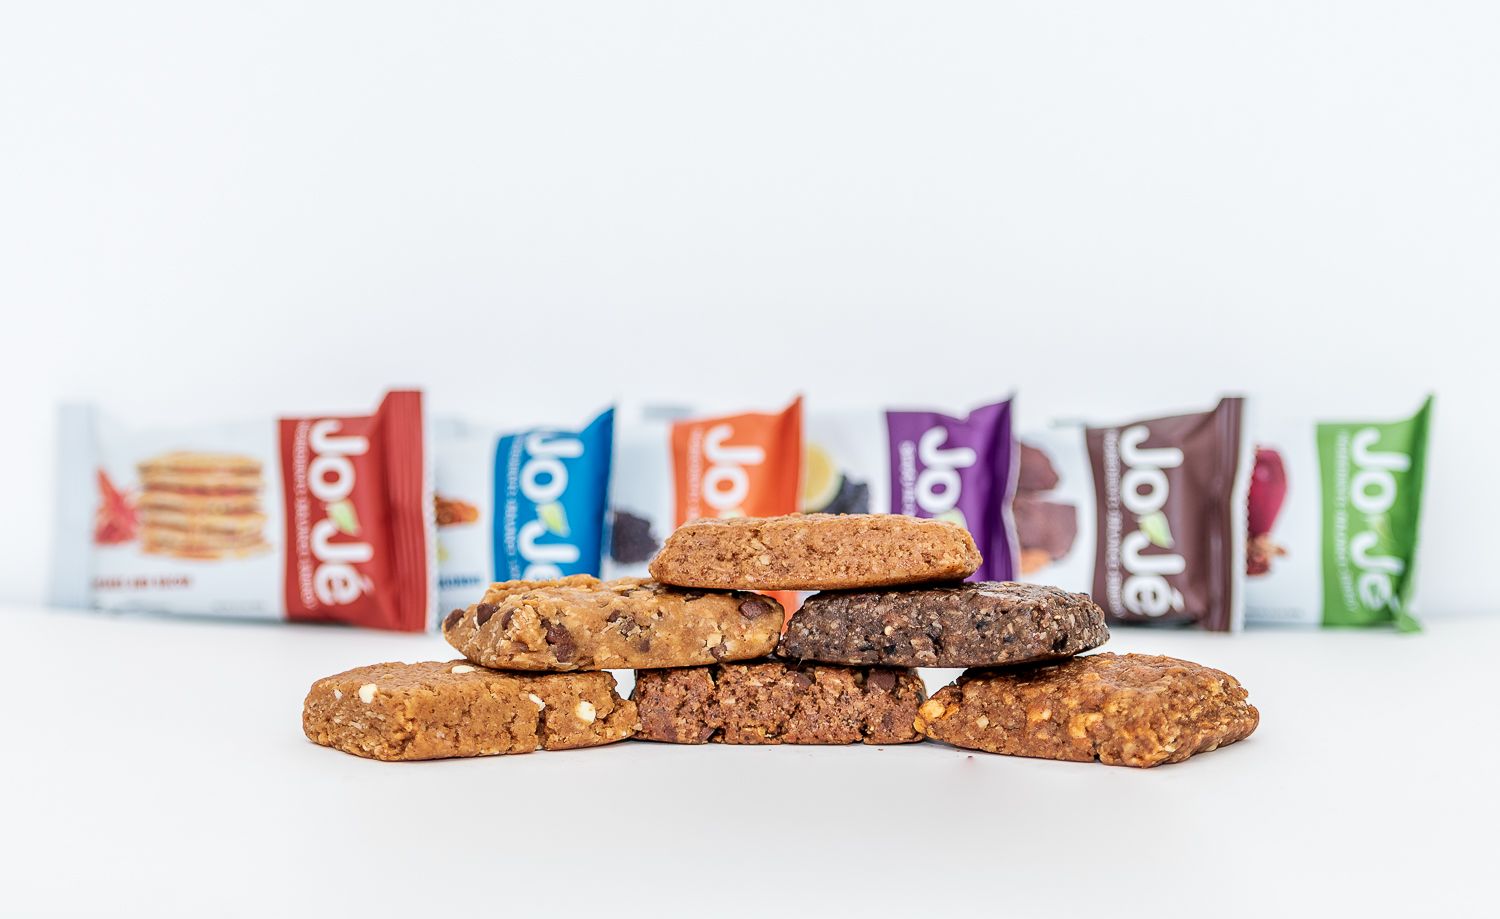 Six flavors of JoJe bars in their wrappers and also unwrapped.